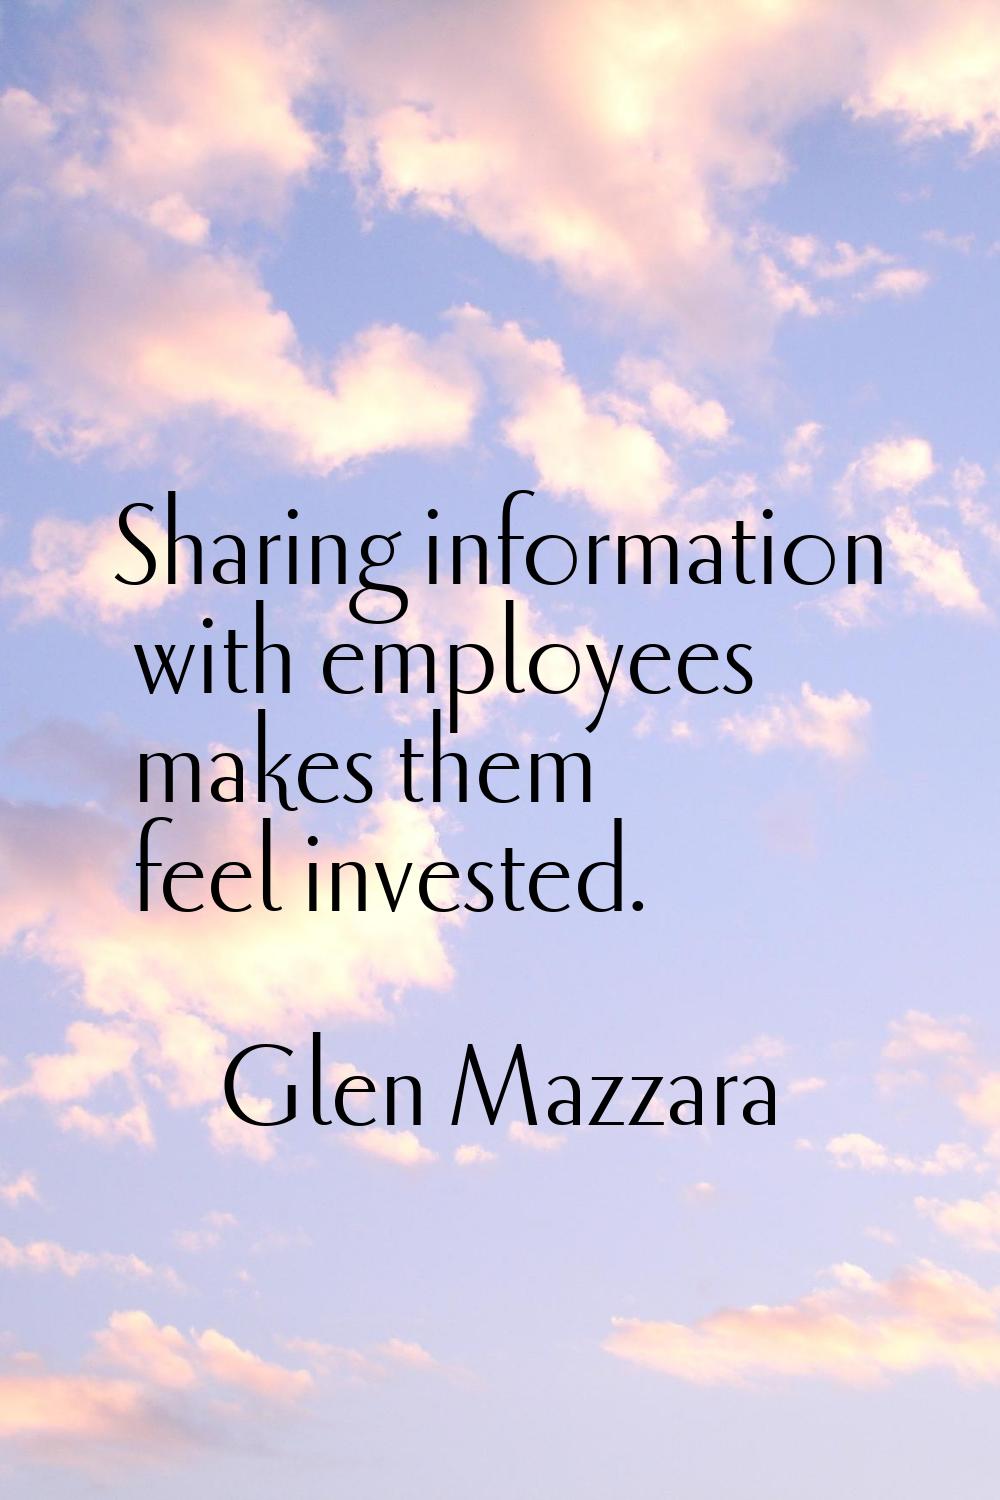 Sharing information with employees makes them feel invested.